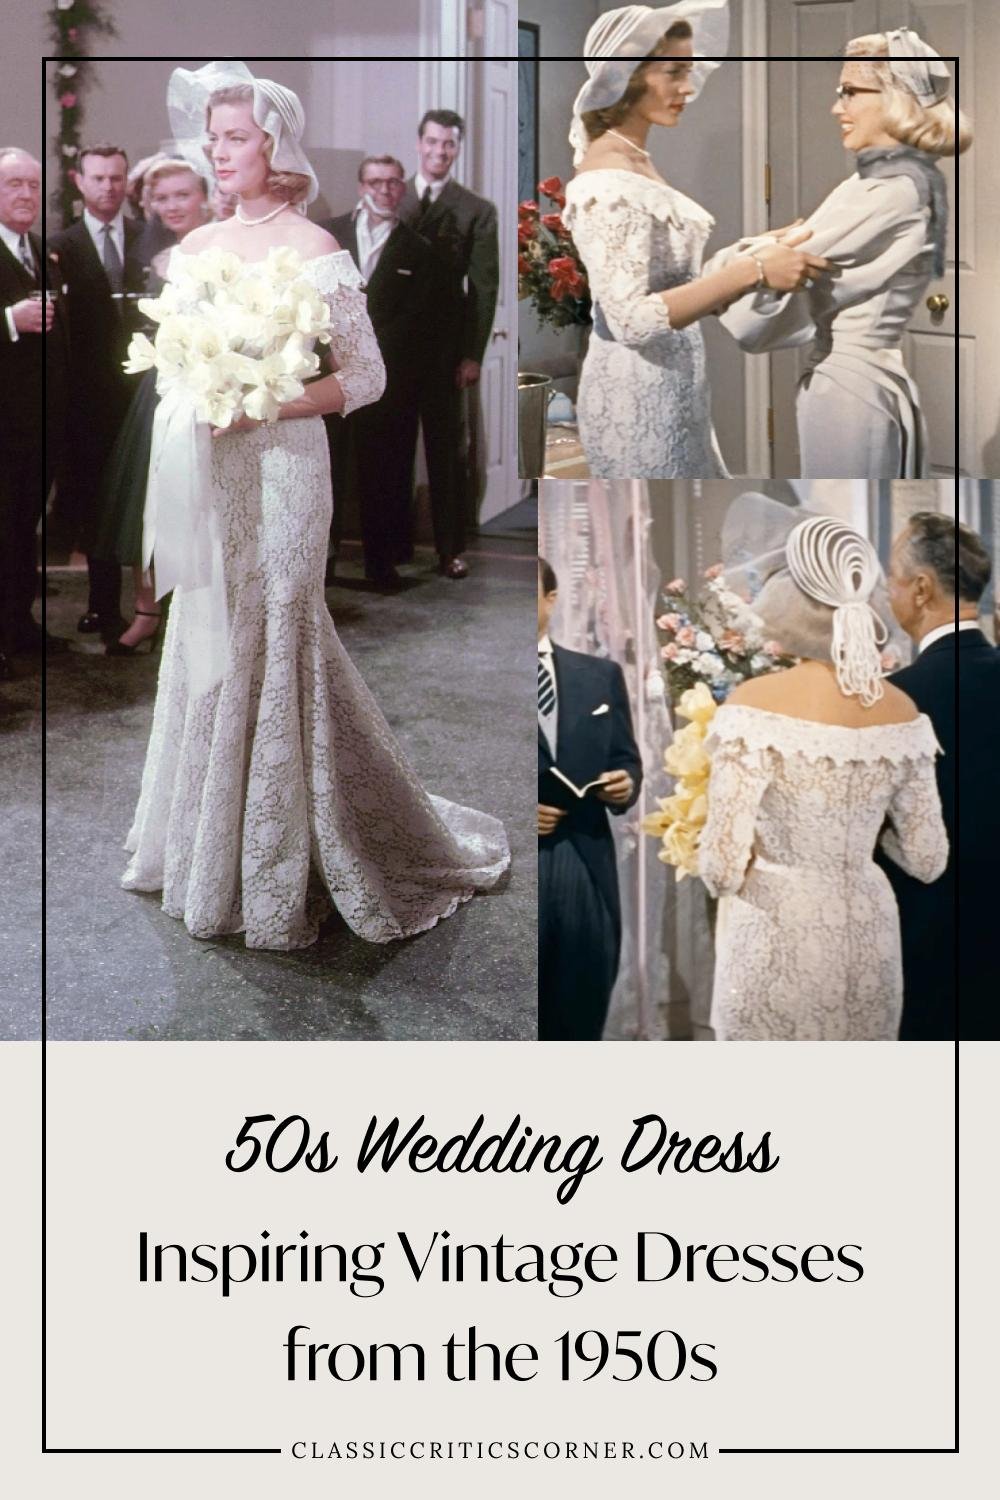 Cocktail and evening dresses: 1950s women | Fashion and Decor: A Cultural  History